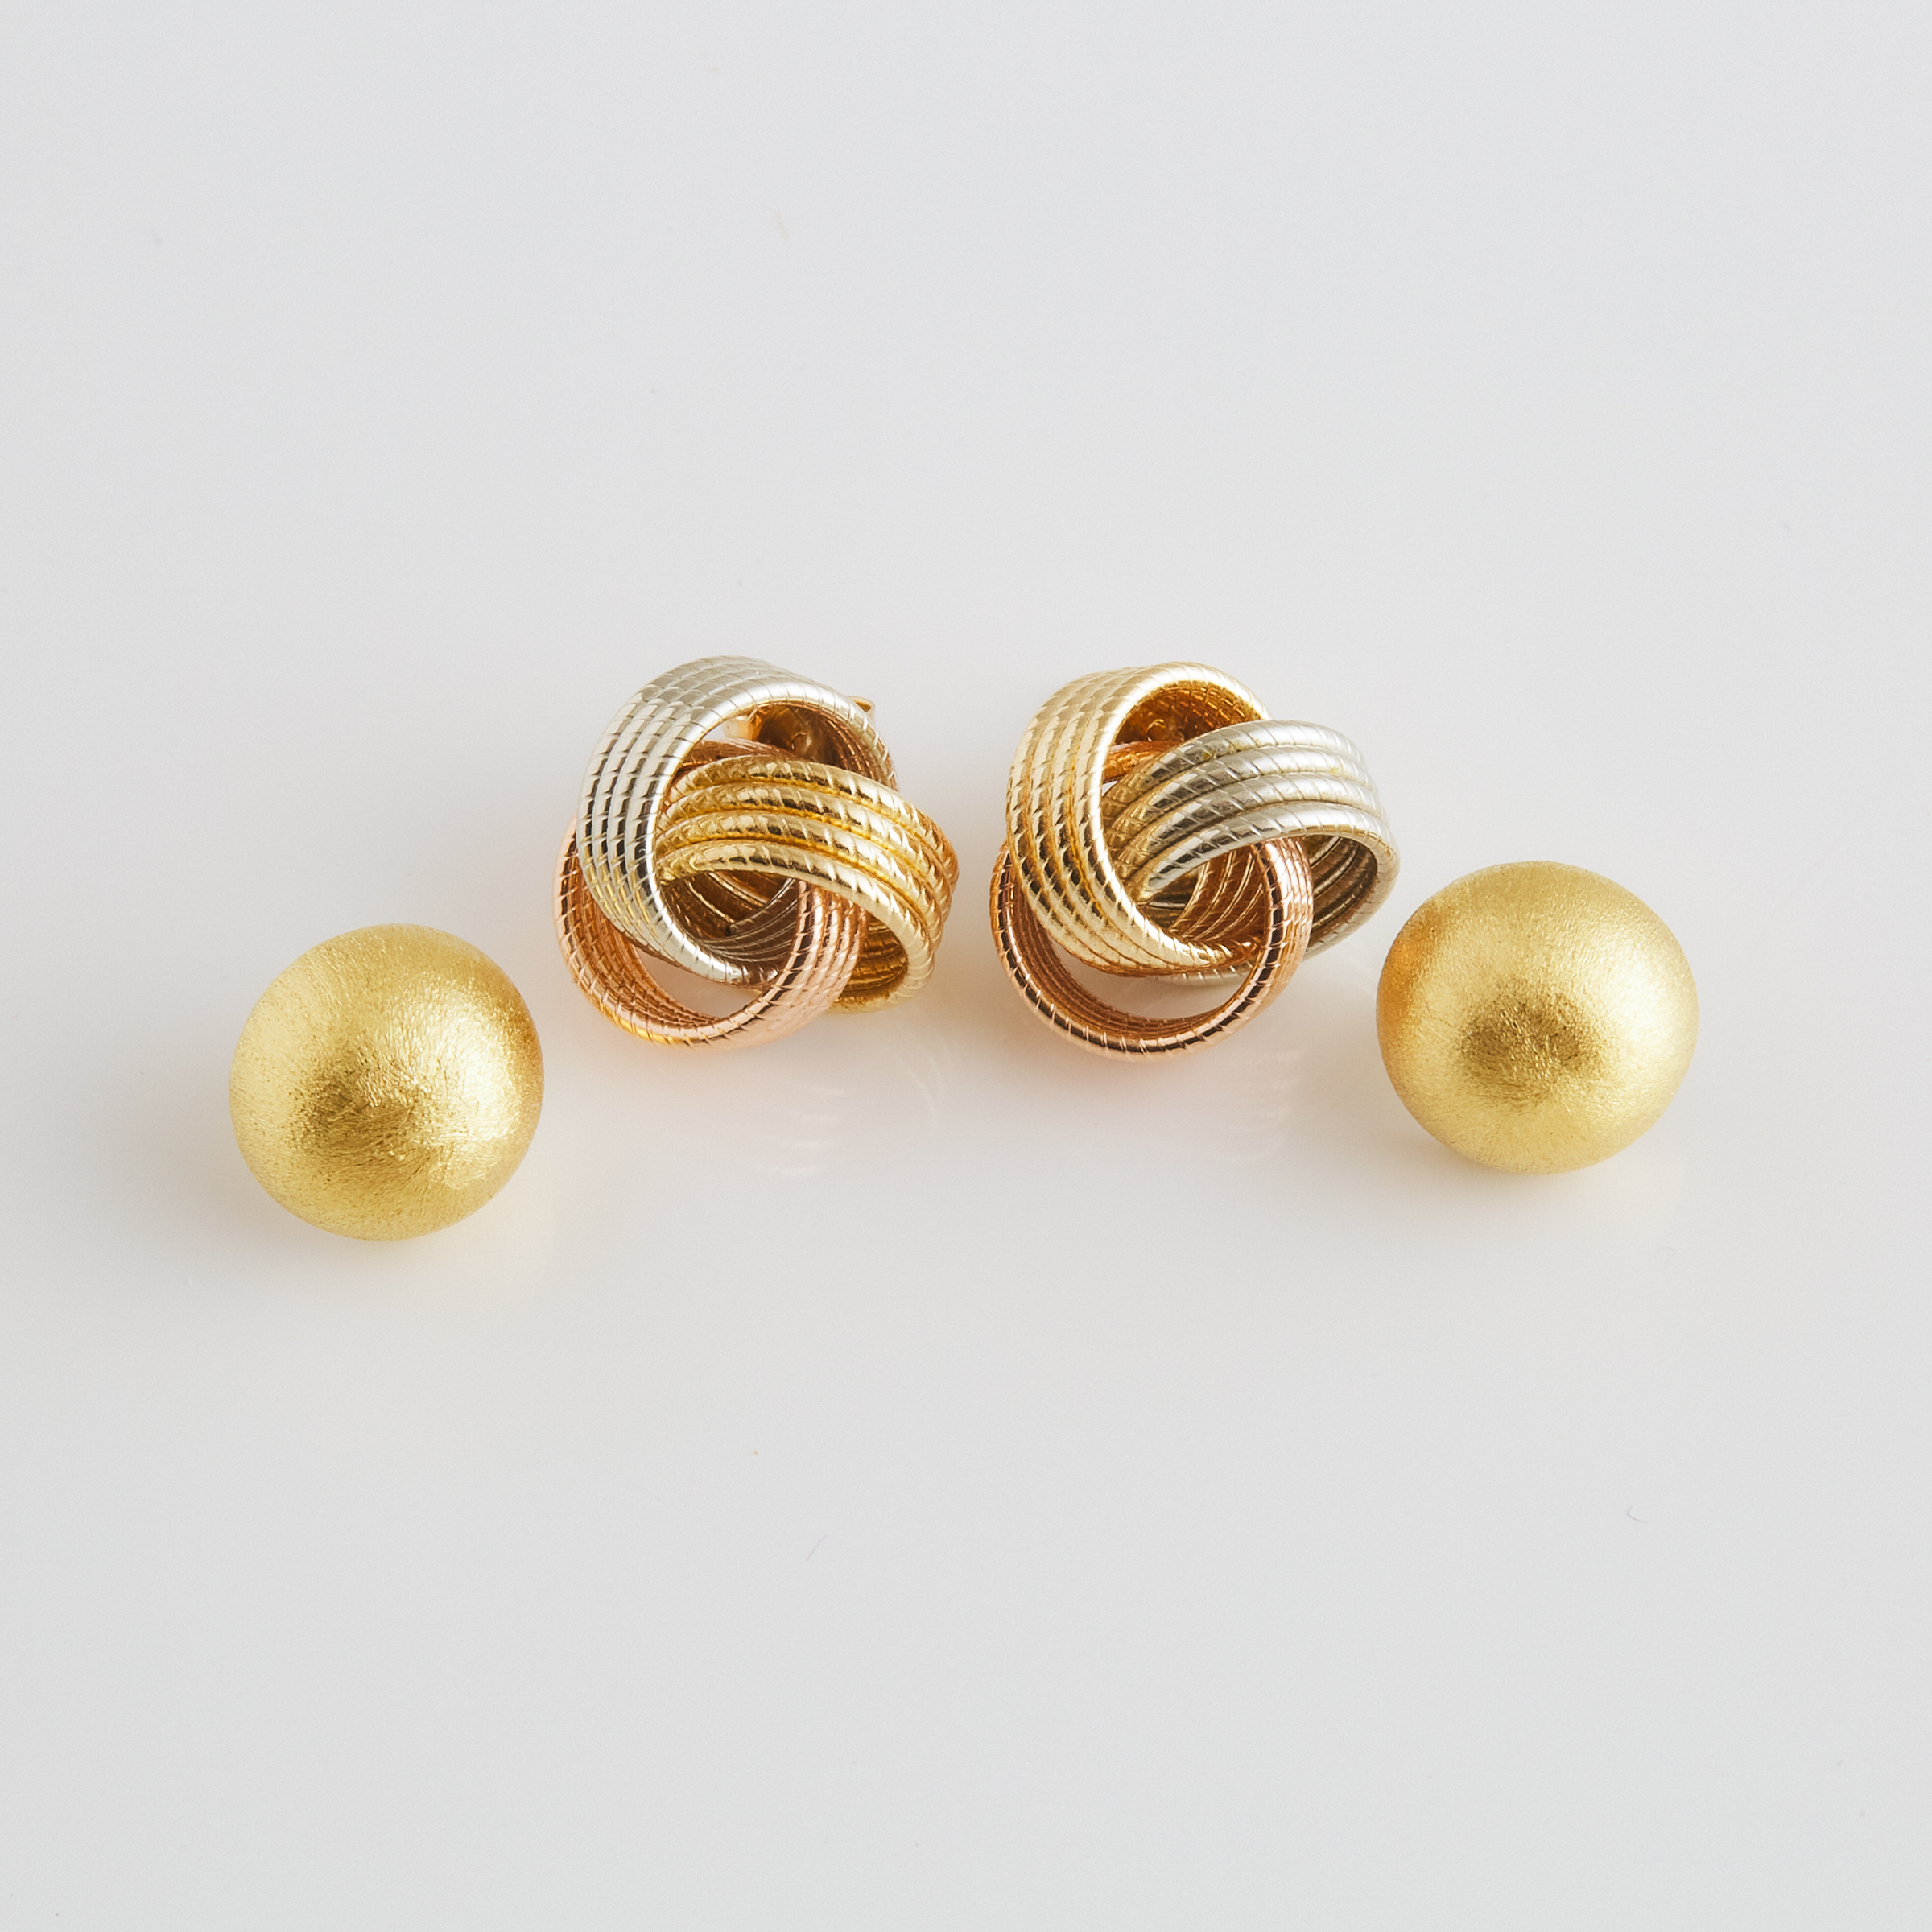 2 x Pairs Of Gold Earrings